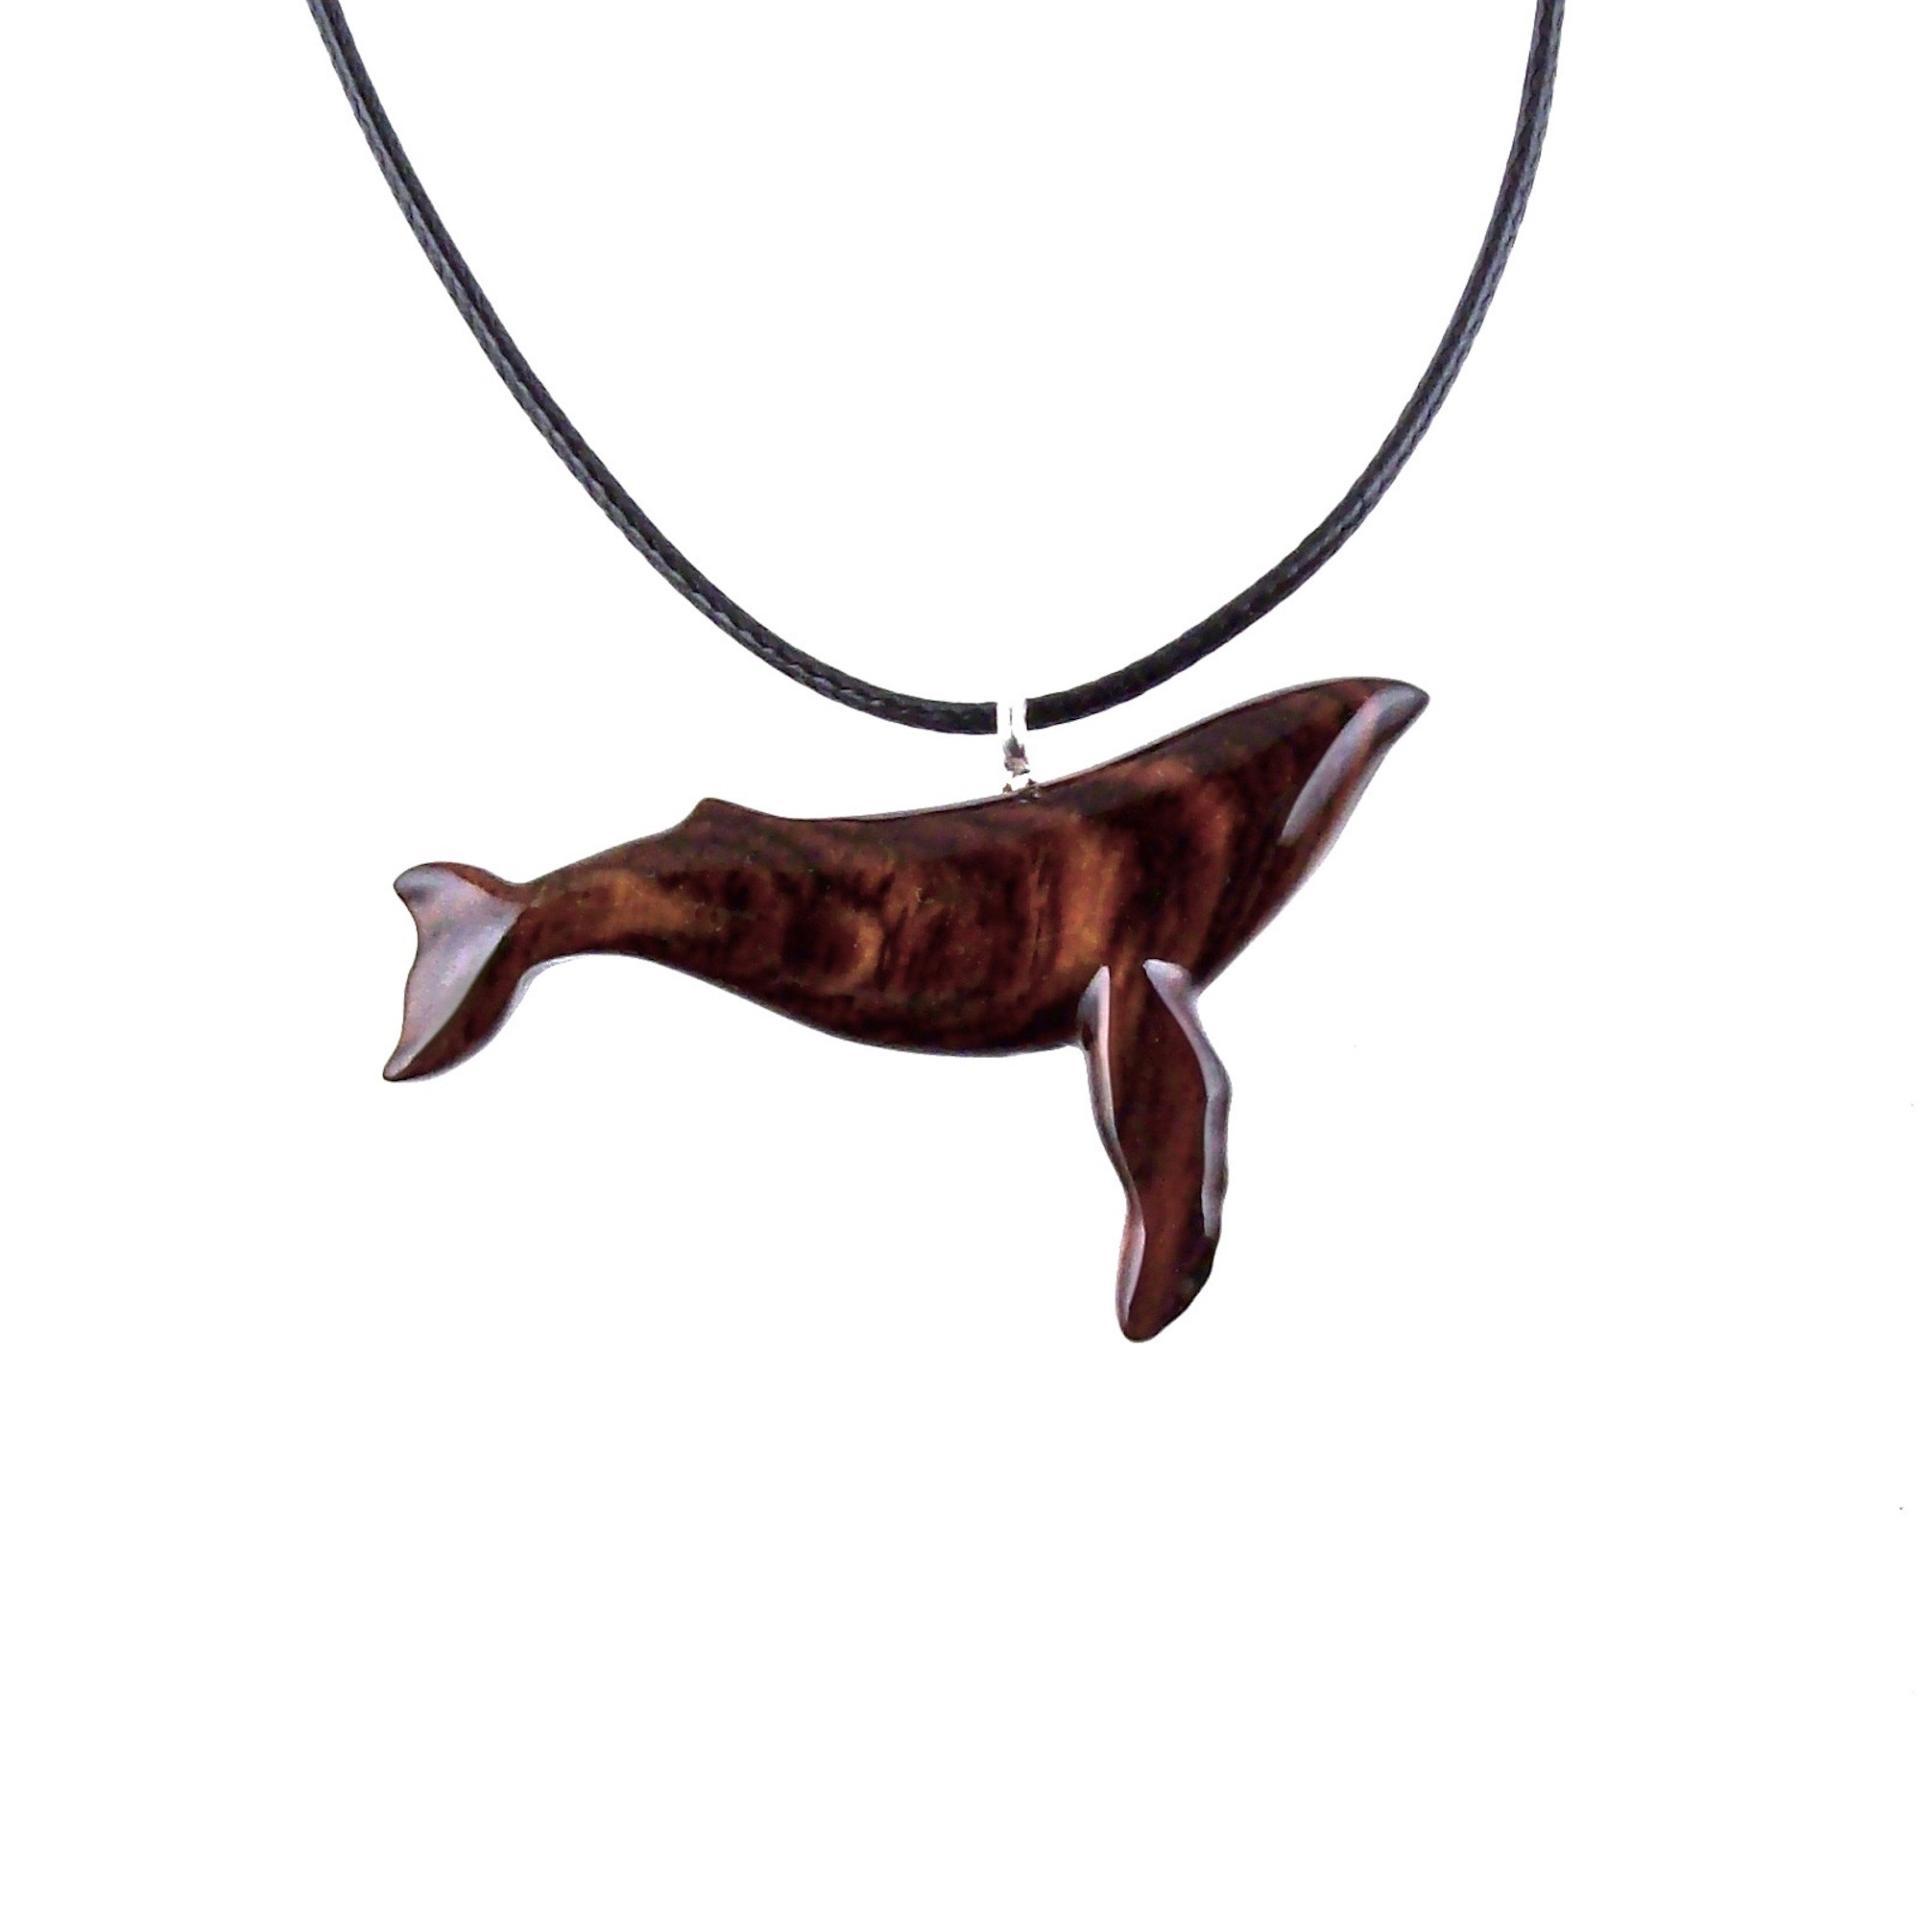 Humpback Whale Necklace, Hand Carved Wooden Sea Animal Pendant, Nautical Wood Jewelry, Whale-watcher Gift for Men Women